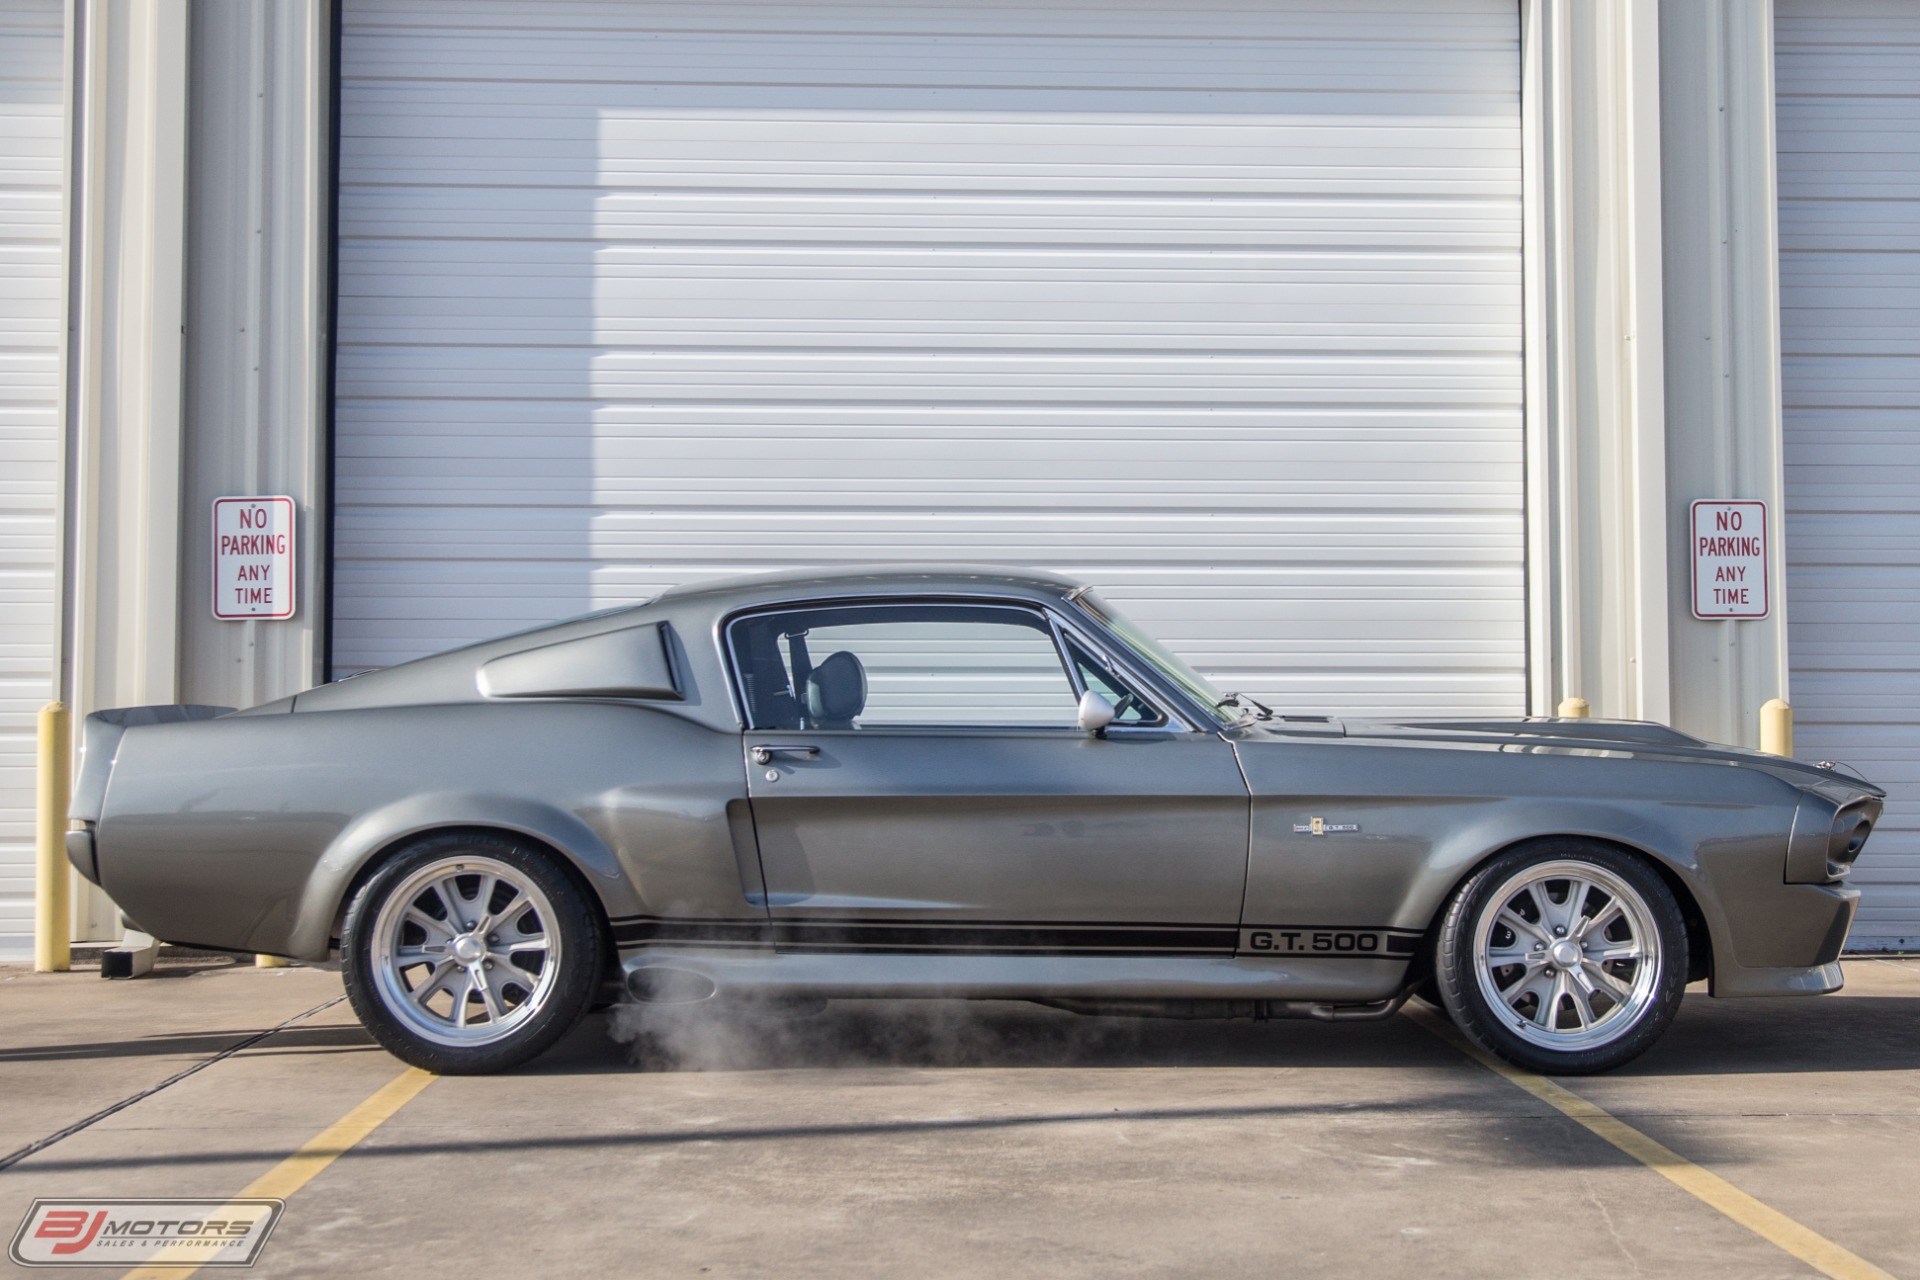 Used 1967 Ford Mustang GT500 Eleanor Clone For Sale ($109,995) | BJ ... 1967 Ford Mustang Eleanor